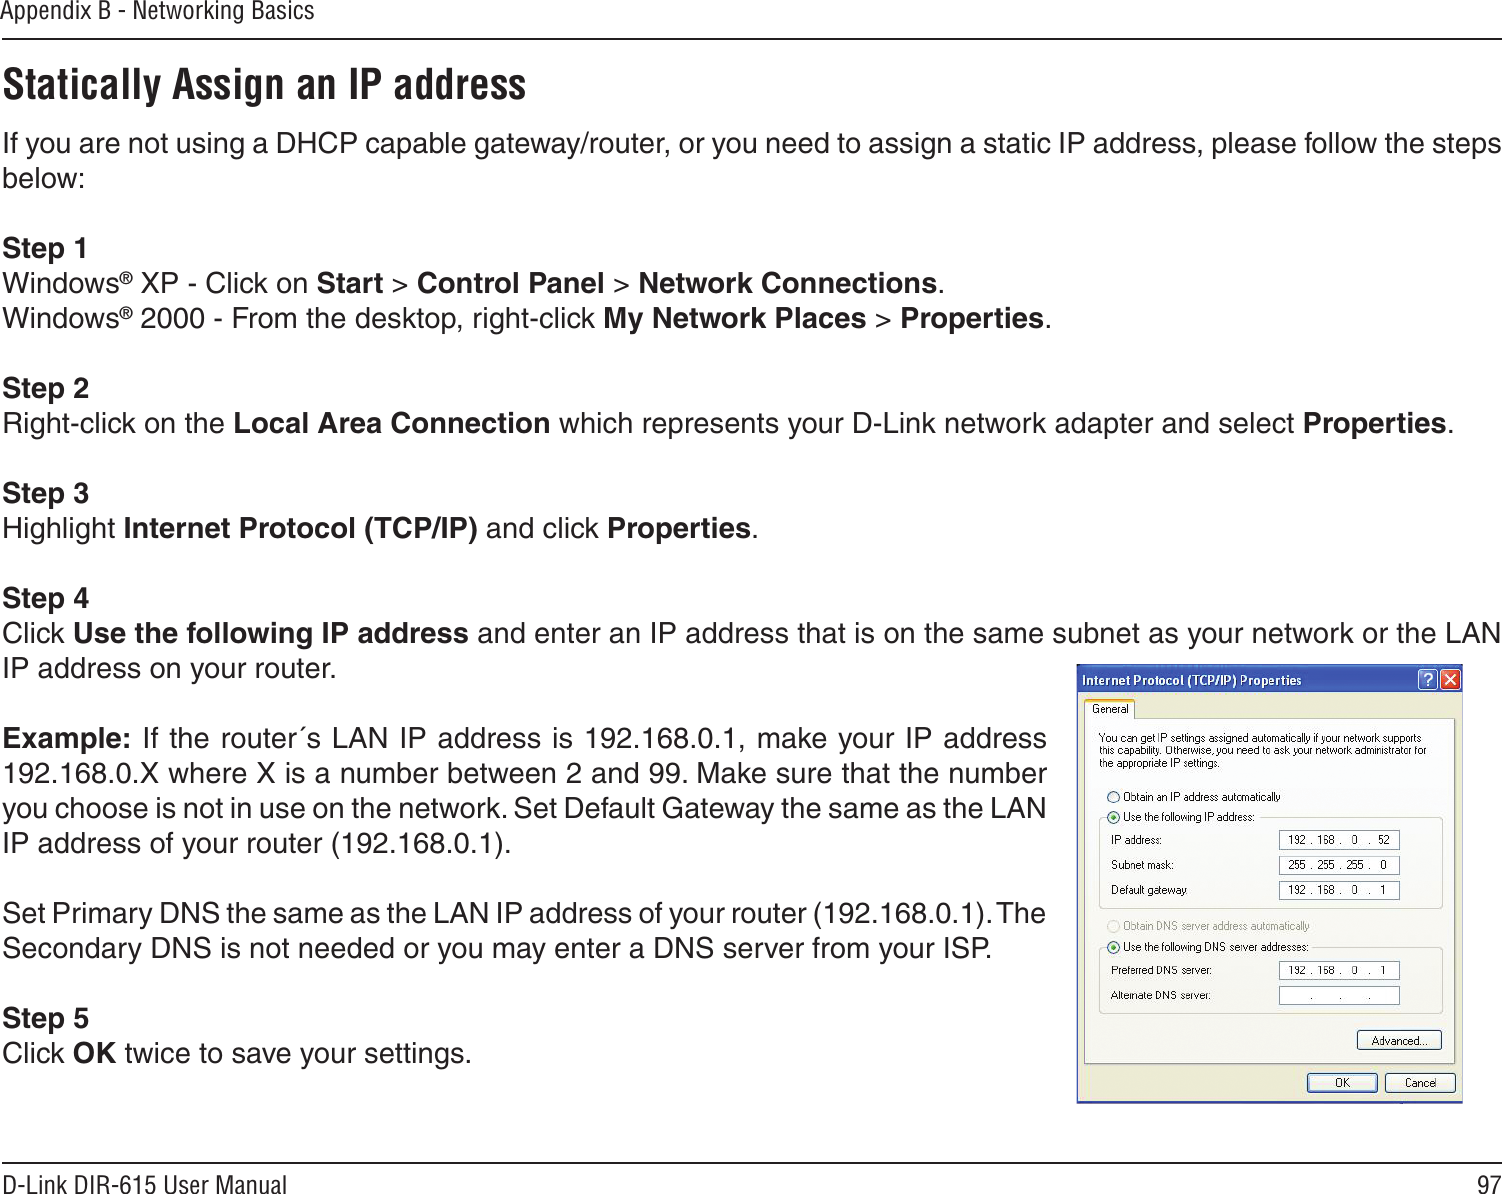 97D-Link DIR-615 User ManualAppendix B - Networking BasicsStatically Assign an IP addressIf you are not using a DHCP capable gateway/router, or you need to assign a static IP address, please follow the steps below:Step 1Windows® XP - Click on Start &gt; Control Panel &gt; Network Connections.Windows® 2000 - From the desktop, right-click My Network Places &gt; Properties.Step 2Right-click on the Local Area Connection which represents your D-Link network adapter and select Properties.Step 3Highlight Internet Protocol (TCP/IP) and click Properties.Step 4Click Use the following IP address and enter an IP address that is on the same subnet as your network or the LAN IP address on your router. Example: If the router´s LAN IP address is 192.168.0.1, make your IP address 192.168.0.X where X is a number between 2 and 99. Make sure that the number you choose is not in use on the network. Set Default Gateway the same as the LAN IP address of your router (192.168.0.1). Set Primary DNS the same as the LAN IP address of your router (192.168.0.1). The Secondary DNS is not needed or you may enter a DNS server from your ISP.Step 5Click OK twice to save your settings.